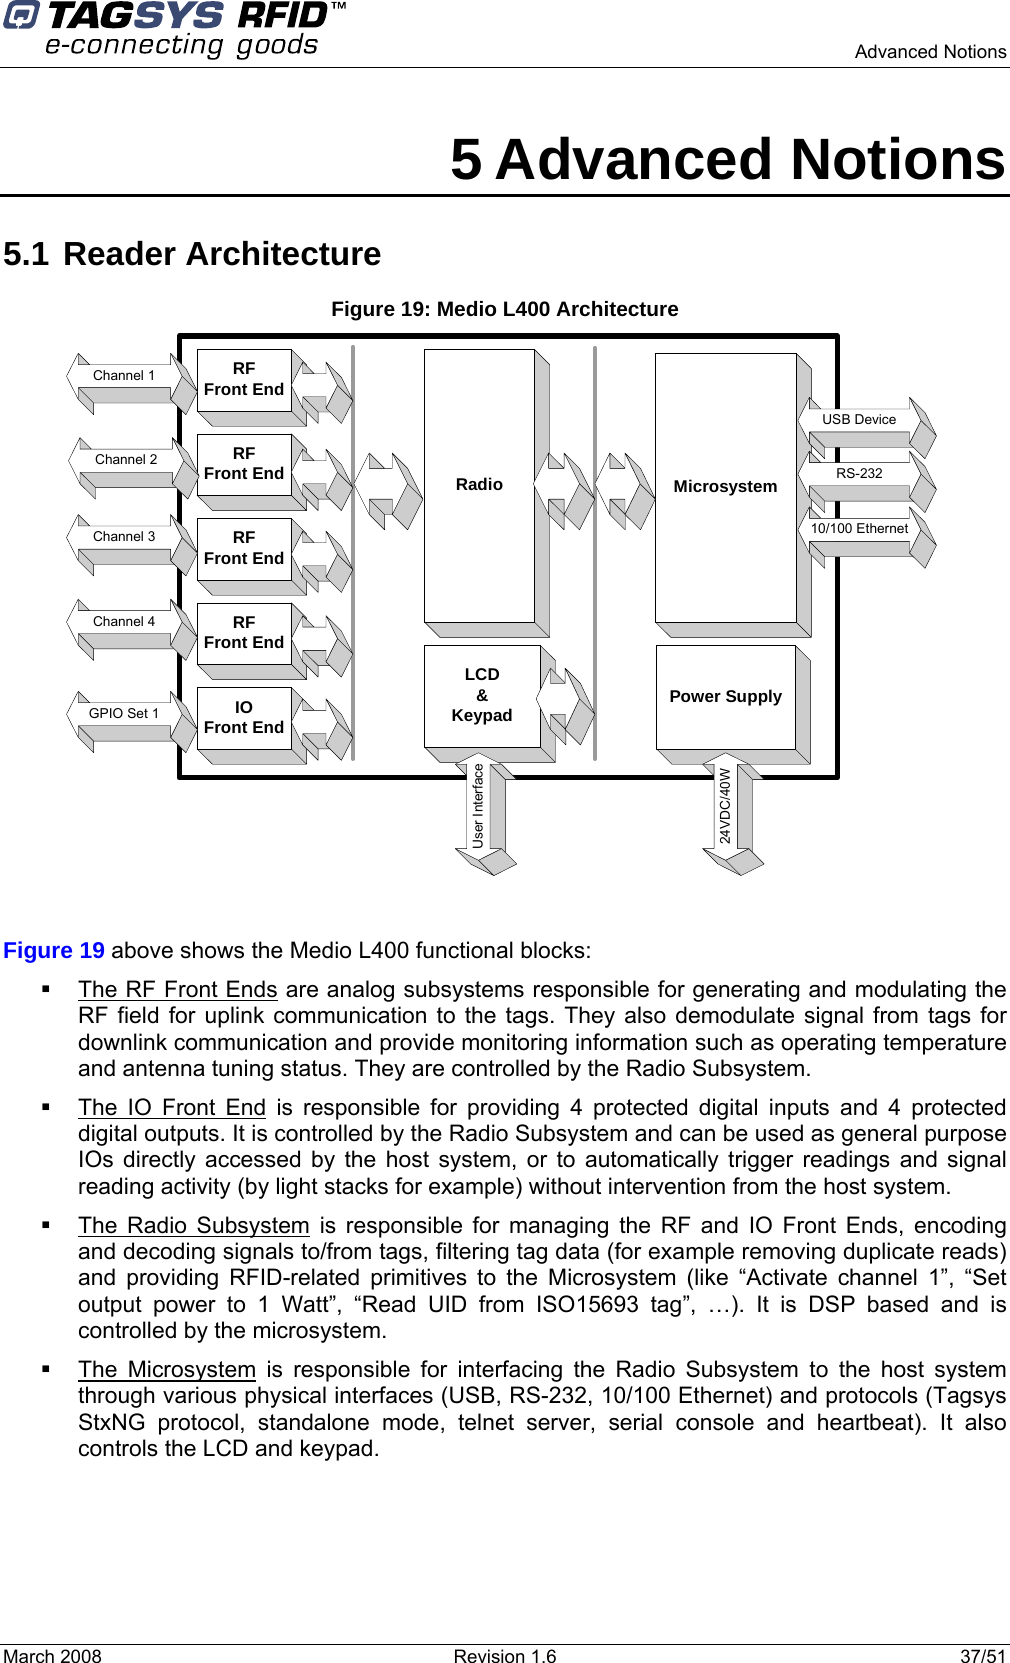      Advanced Notions March 2008  Revision 1.6  37/51  5 Advanced Notions 5.1 Reader Architecture Figure 19: Medio L400 Architecture Radio MicrosystemRFFront EndRFFront EndRFFront EndRFFront EndIOFront EndChannel 2Channel 1Channel 3Channel 4GPIO Set 1USB DeviceRS-23210/100 EthernetPower Supply24VDC/40WLCD&amp;KeypadUser Interface Figure 19 above shows the Medio L400 functional blocks:   The RF Front Ends are analog subsystems responsible for generating and modulating the RF field for uplink communication to the tags. They also demodulate signal from tags for downlink communication and provide monitoring information such as operating temperature and antenna tuning status. They are controlled by the Radio Subsystem.    The IO Front End is responsible for providing 4 protected digital inputs and 4 protected digital outputs. It is controlled by the Radio Subsystem and can be used as general purpose IOs directly accessed by the host system, or to automatically trigger readings and signal reading activity (by light stacks for example) without intervention from the host system.   The Radio Subsystem is responsible for managing the RF and IO Front Ends, encoding and decoding signals to/from tags, filtering tag data (for example removing duplicate reads) and providing RFID-related primitives to the Microsystem (like “Activate channel 1”, “Set output power to 1 Watt”, “Read UID from ISO15693 tag”, …). It is DSP based and is controlled by the microsystem.  The Microsystem is responsible for interfacing the Radio Subsystem to the host system through various physical interfaces (USB, RS-232, 10/100 Ethernet) and protocols (Tagsys StxNG protocol, standalone mode, telnet server, serial console and heartbeat). It also controls the LCD and keypad.  